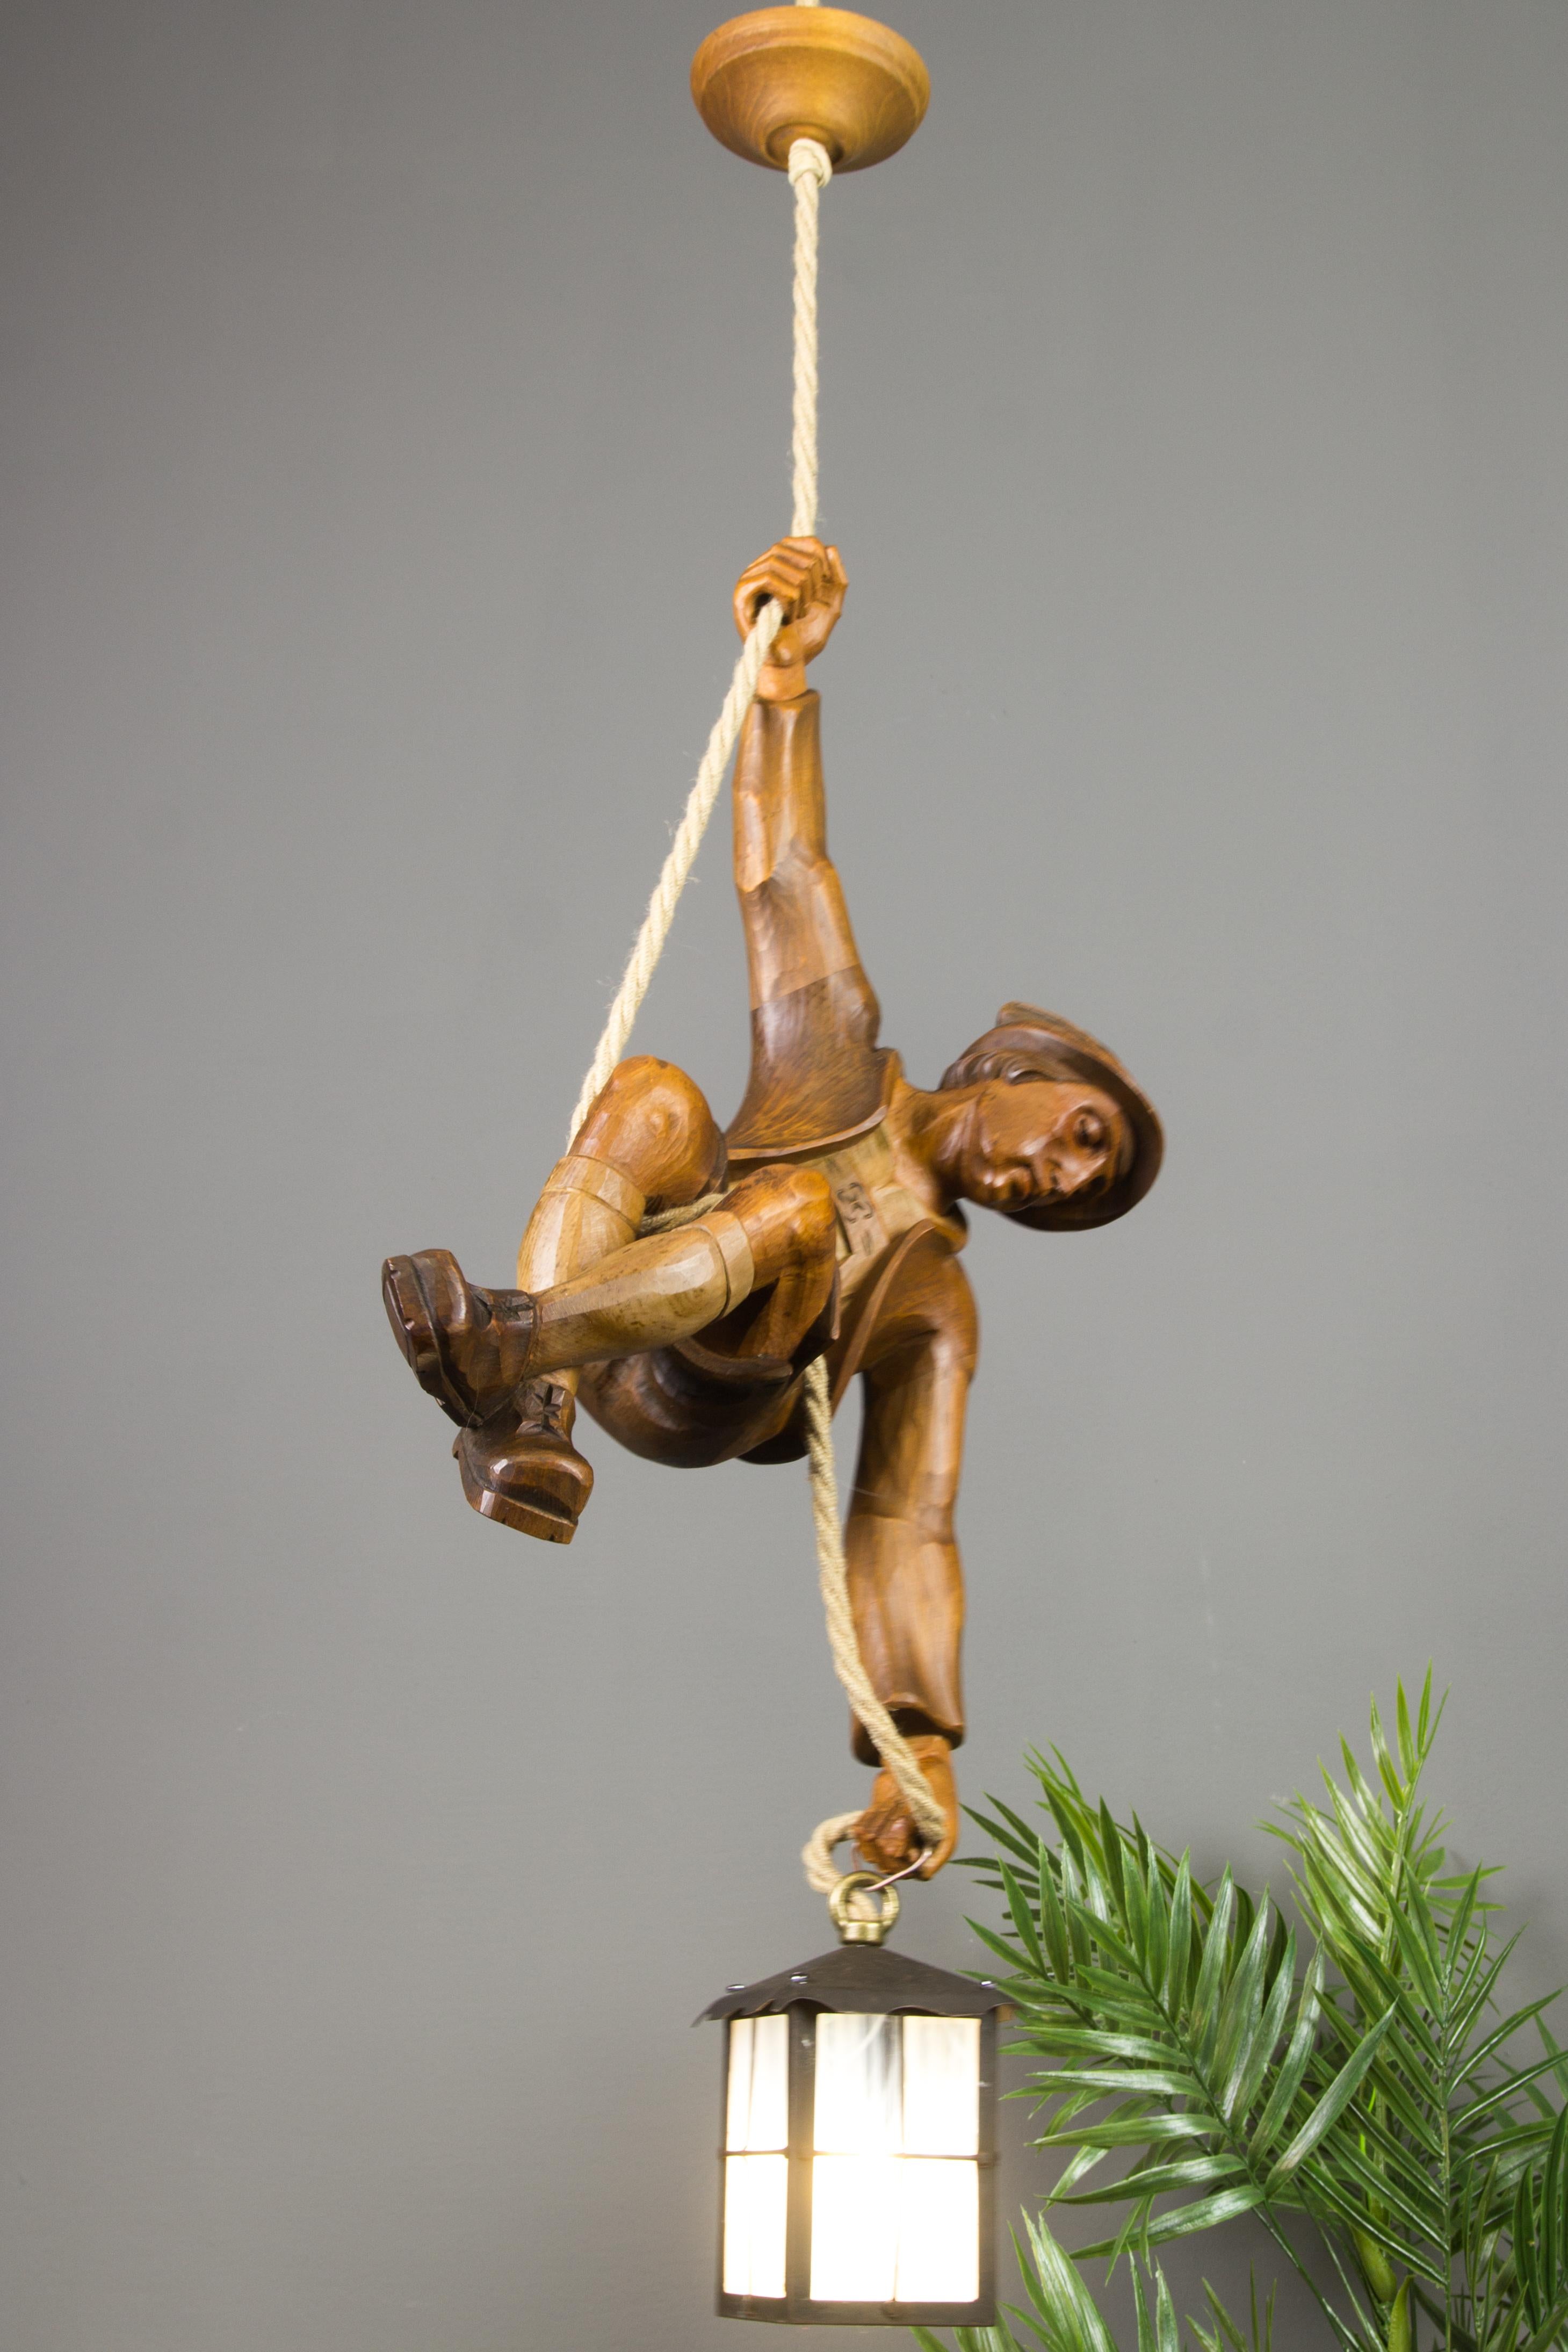 German Figural Pendant Light of a Hand Carved Wood Figure Mountain Climber with Lantern